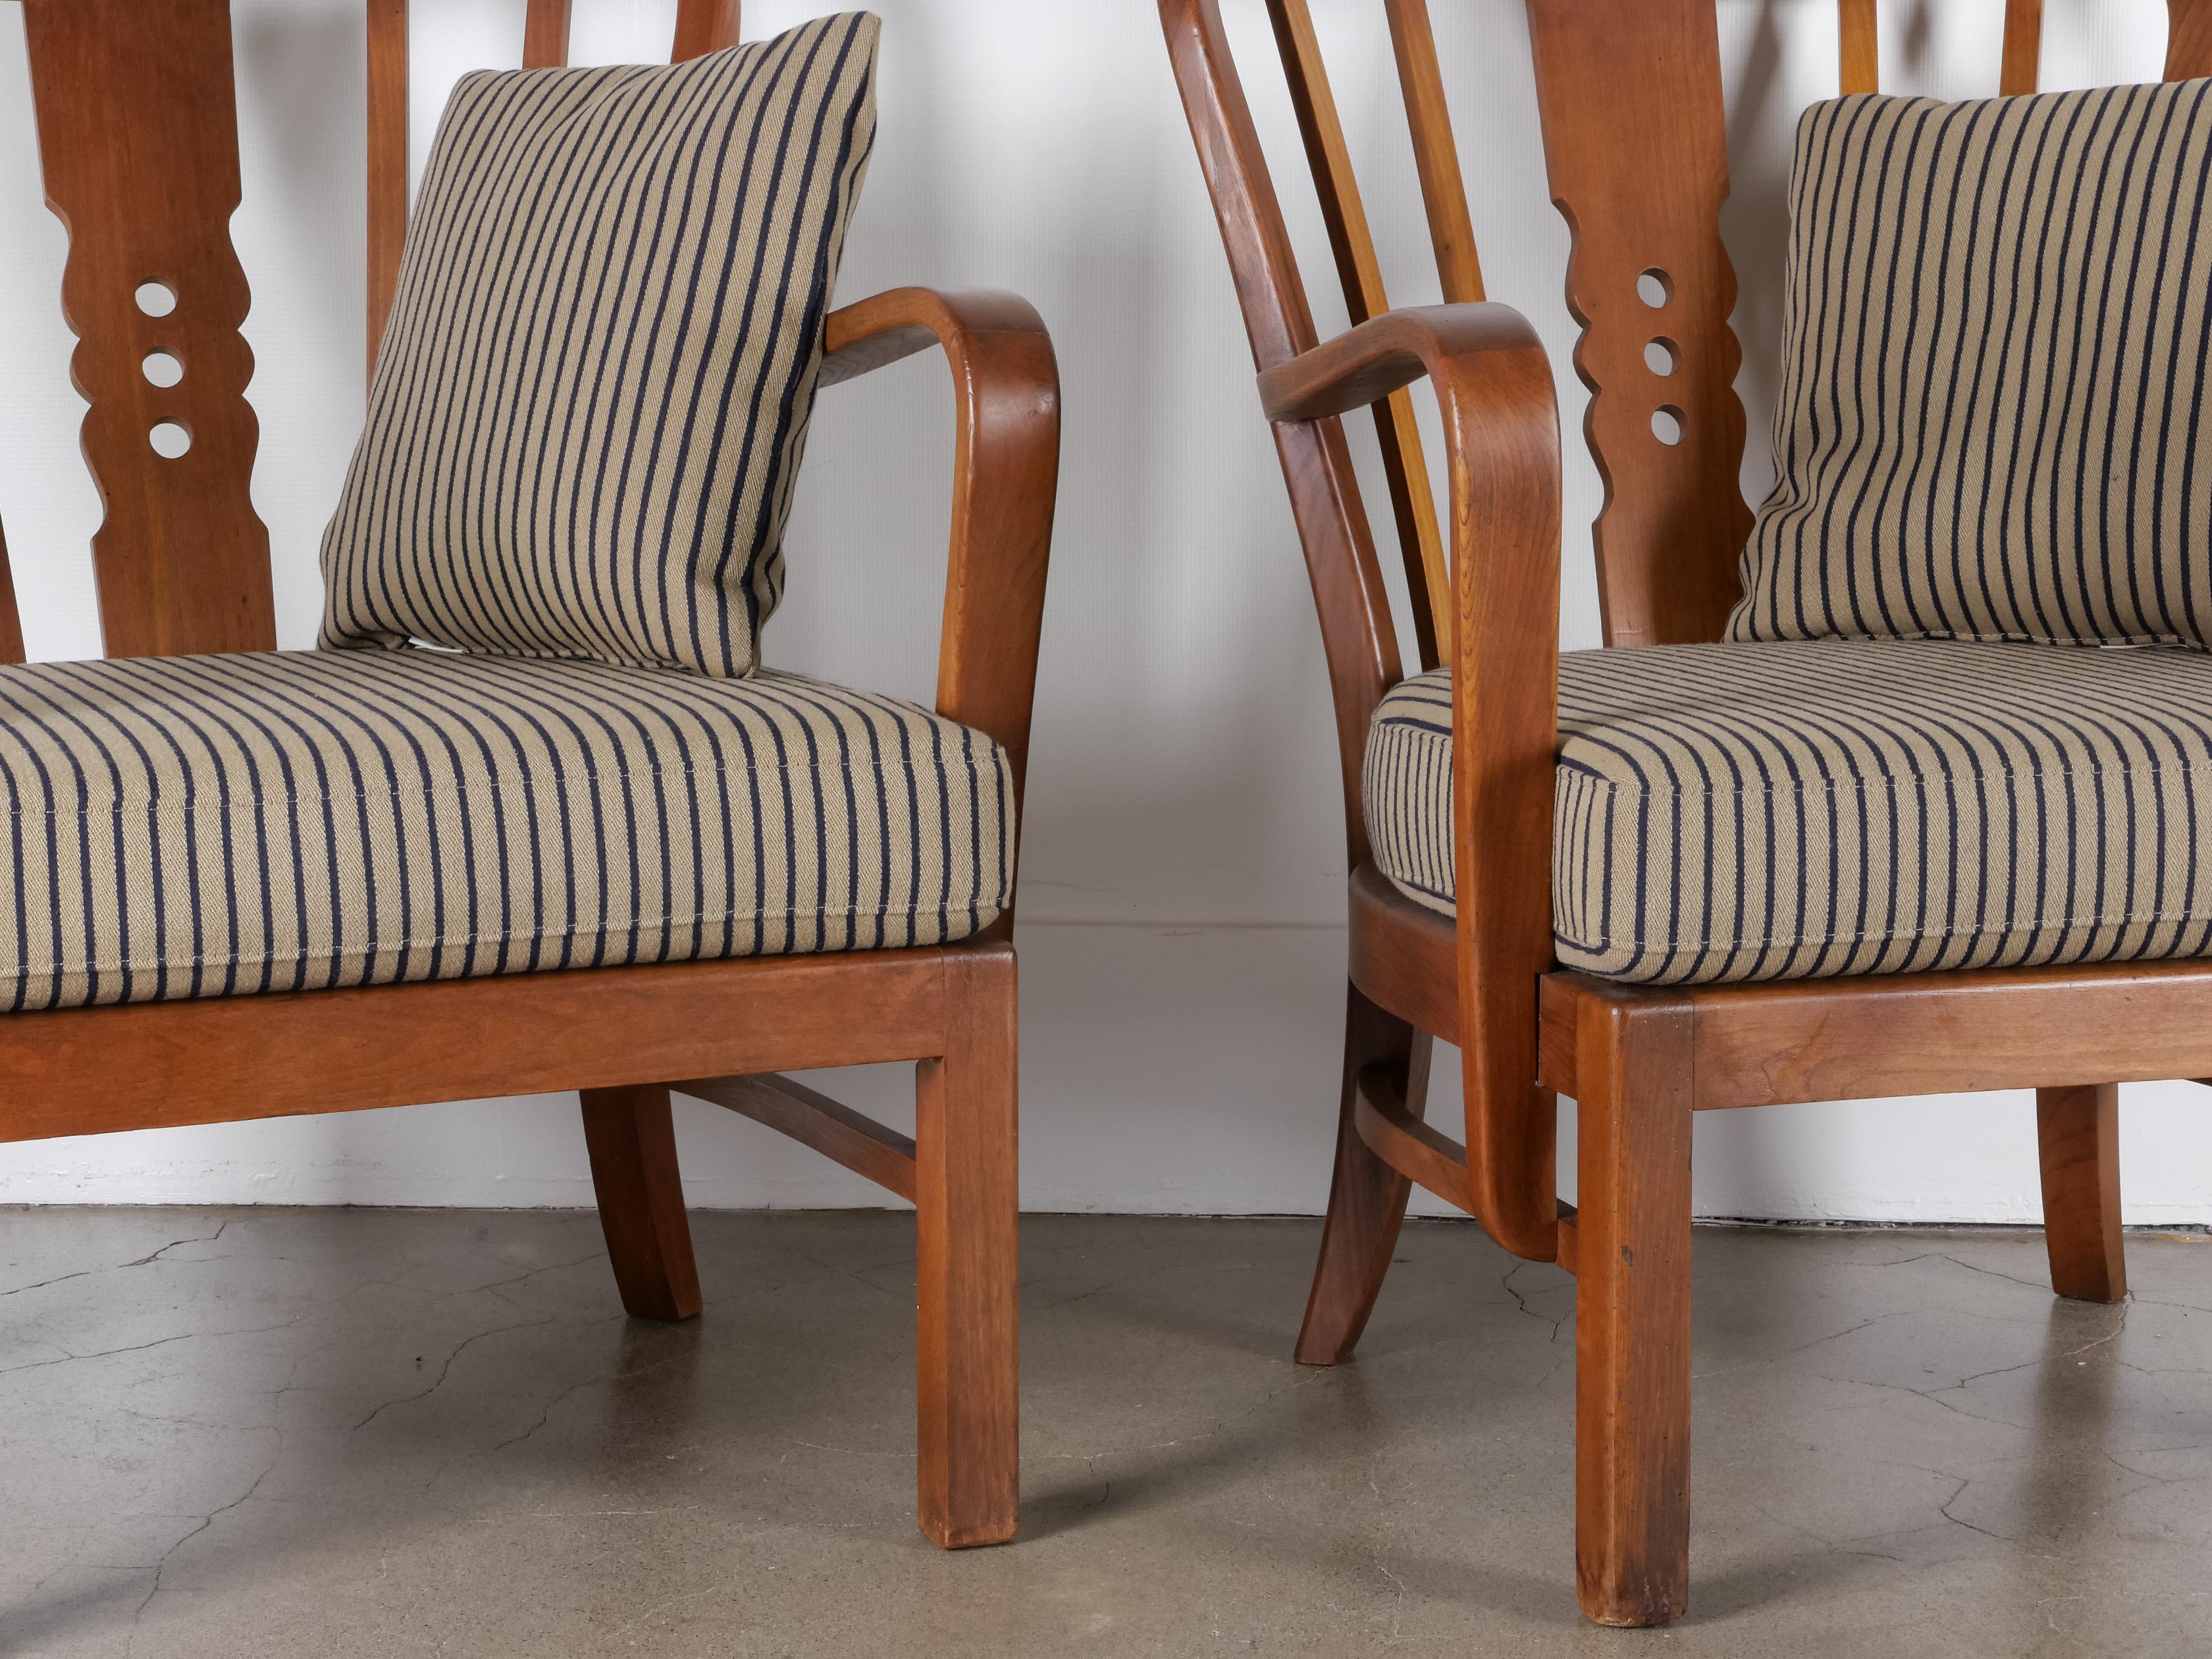 Danish Art Deco 1930s Fritz Hansen Model 1588 Lounge Chairs, A Pair In Good Condition For Sale In Portland, OR